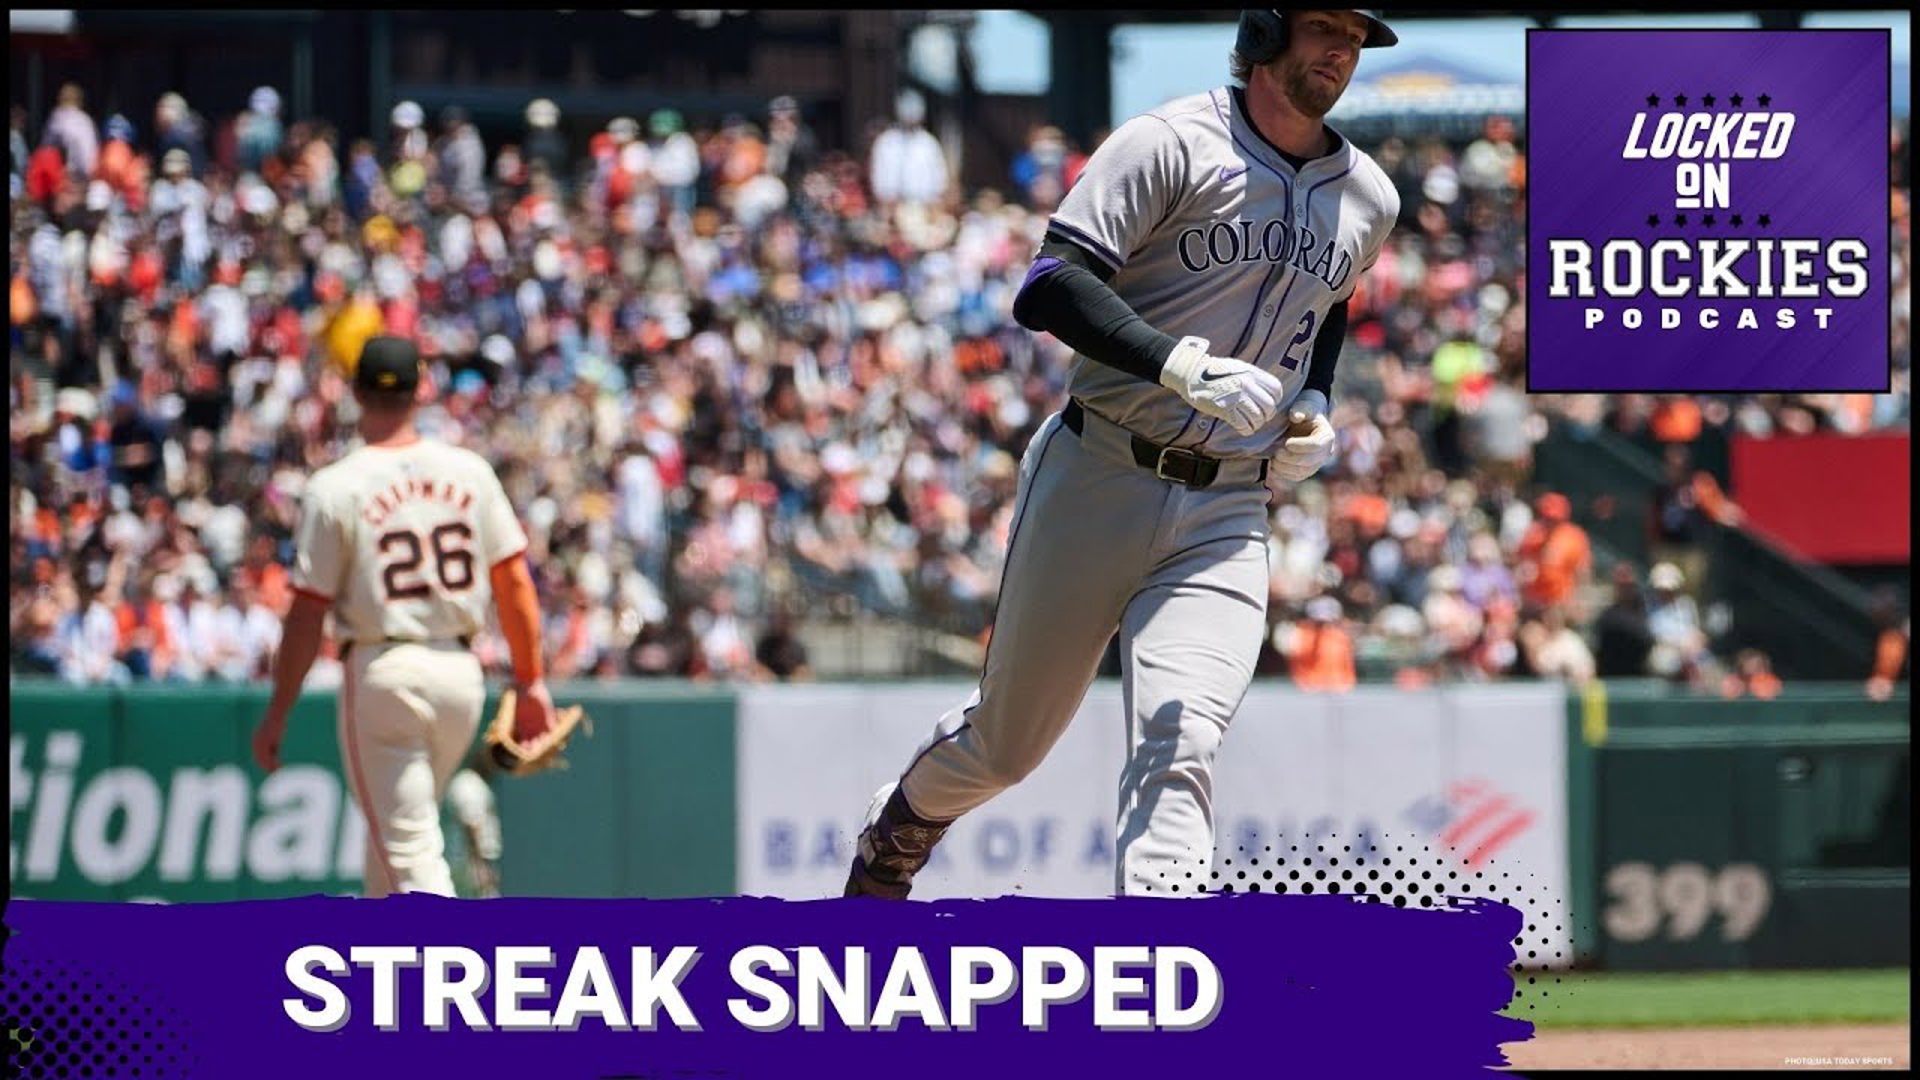 The Giants snapped the winning streak for the Rockies and continued their trend of crushing the Rockies.